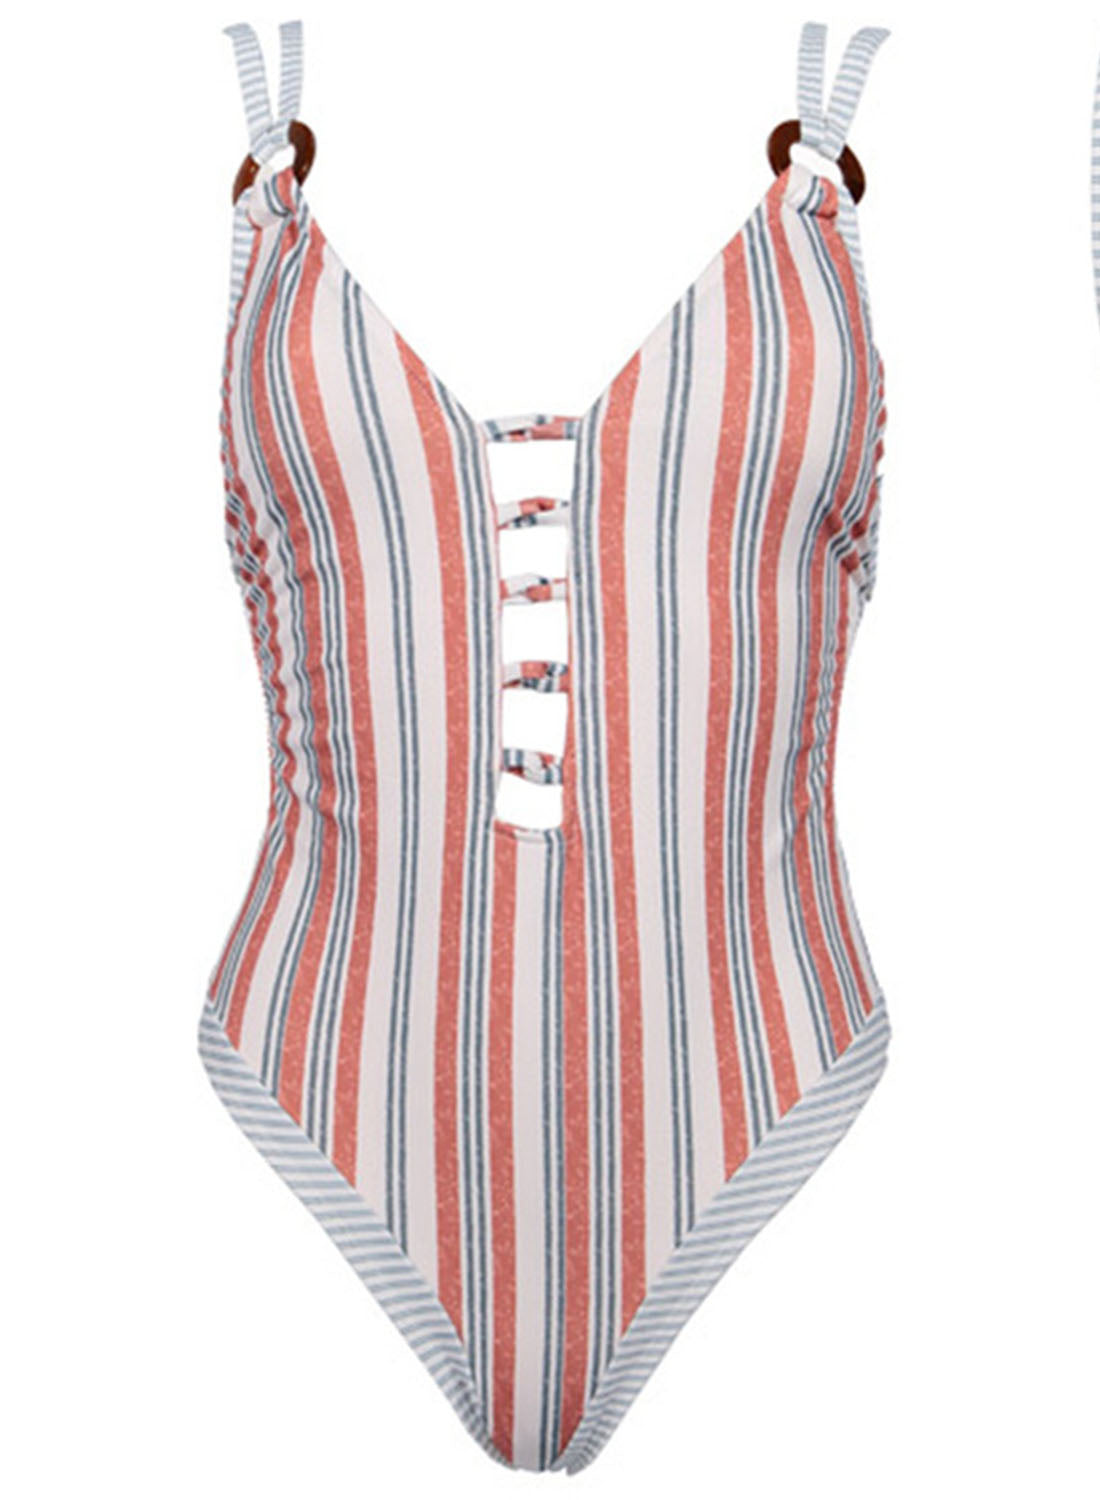 Stripe Women's Swimsuits Striped Strappy Backless One-piece Swimsuits LC441883-19